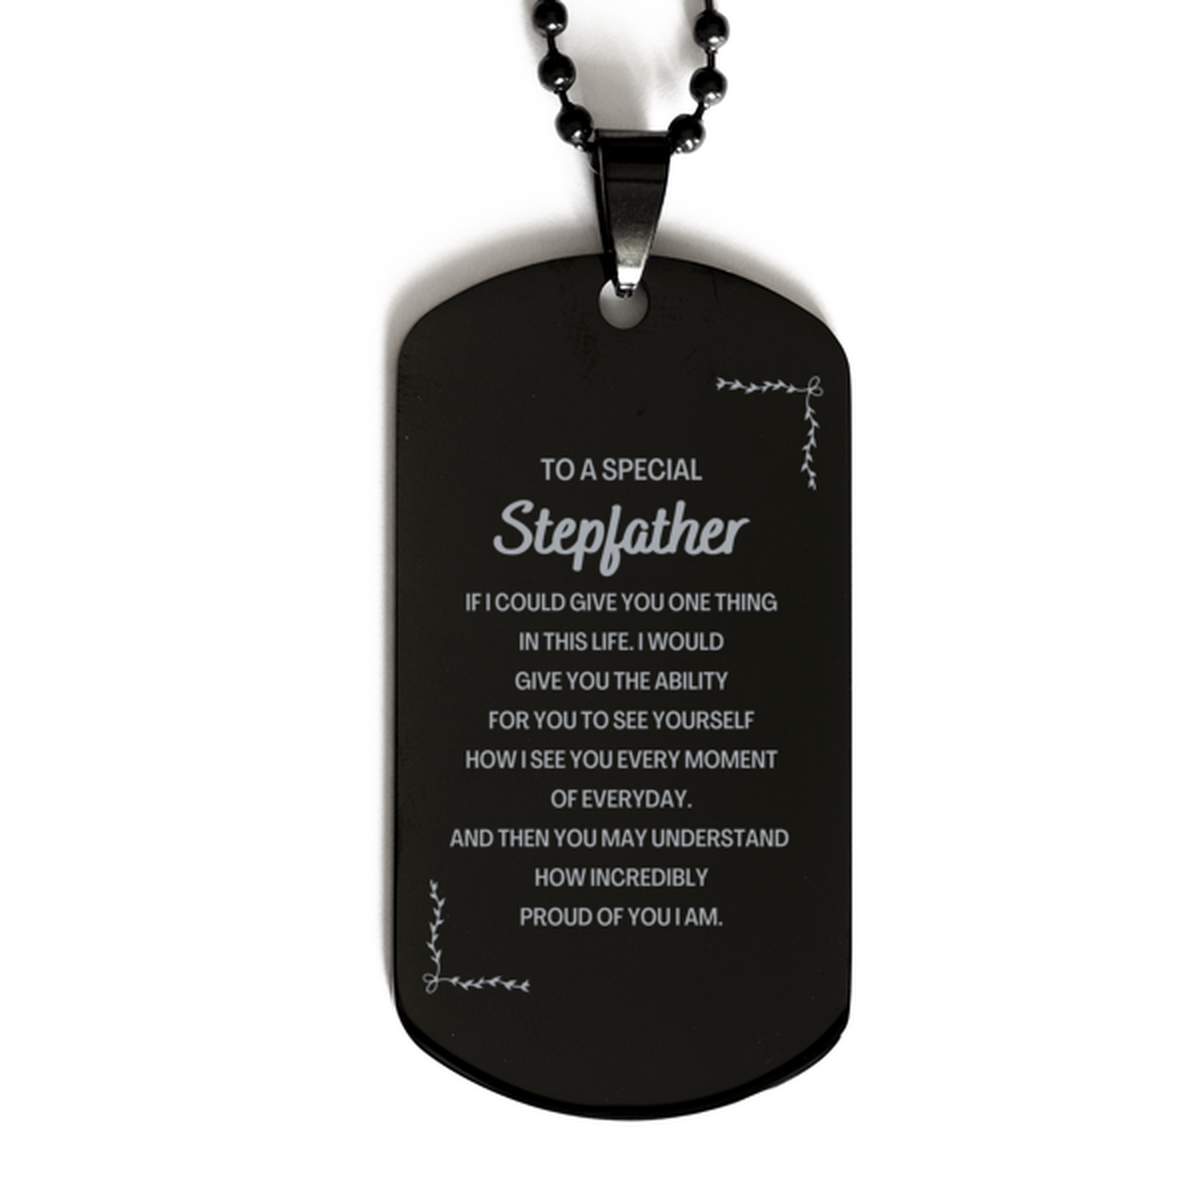 To My Stepfather Black Dog Tag, Gifts For Stepfather Engraved, Inspirational Gifts for Christmas Birthday, Epic Gifts for Stepfather To A Special Stepfather how incredibly proud of you I am